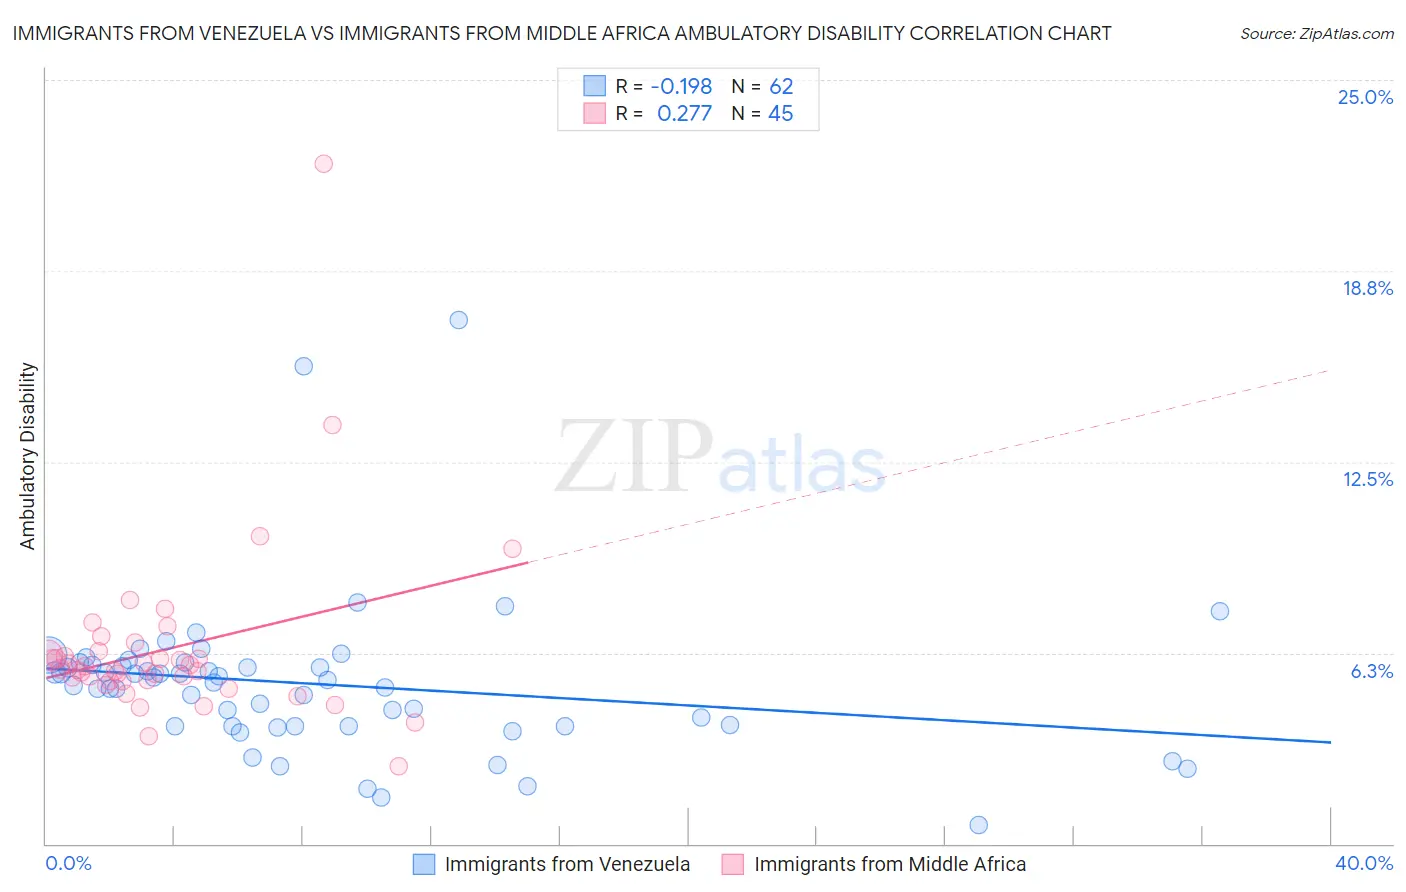 Immigrants from Venezuela vs Immigrants from Middle Africa Ambulatory Disability